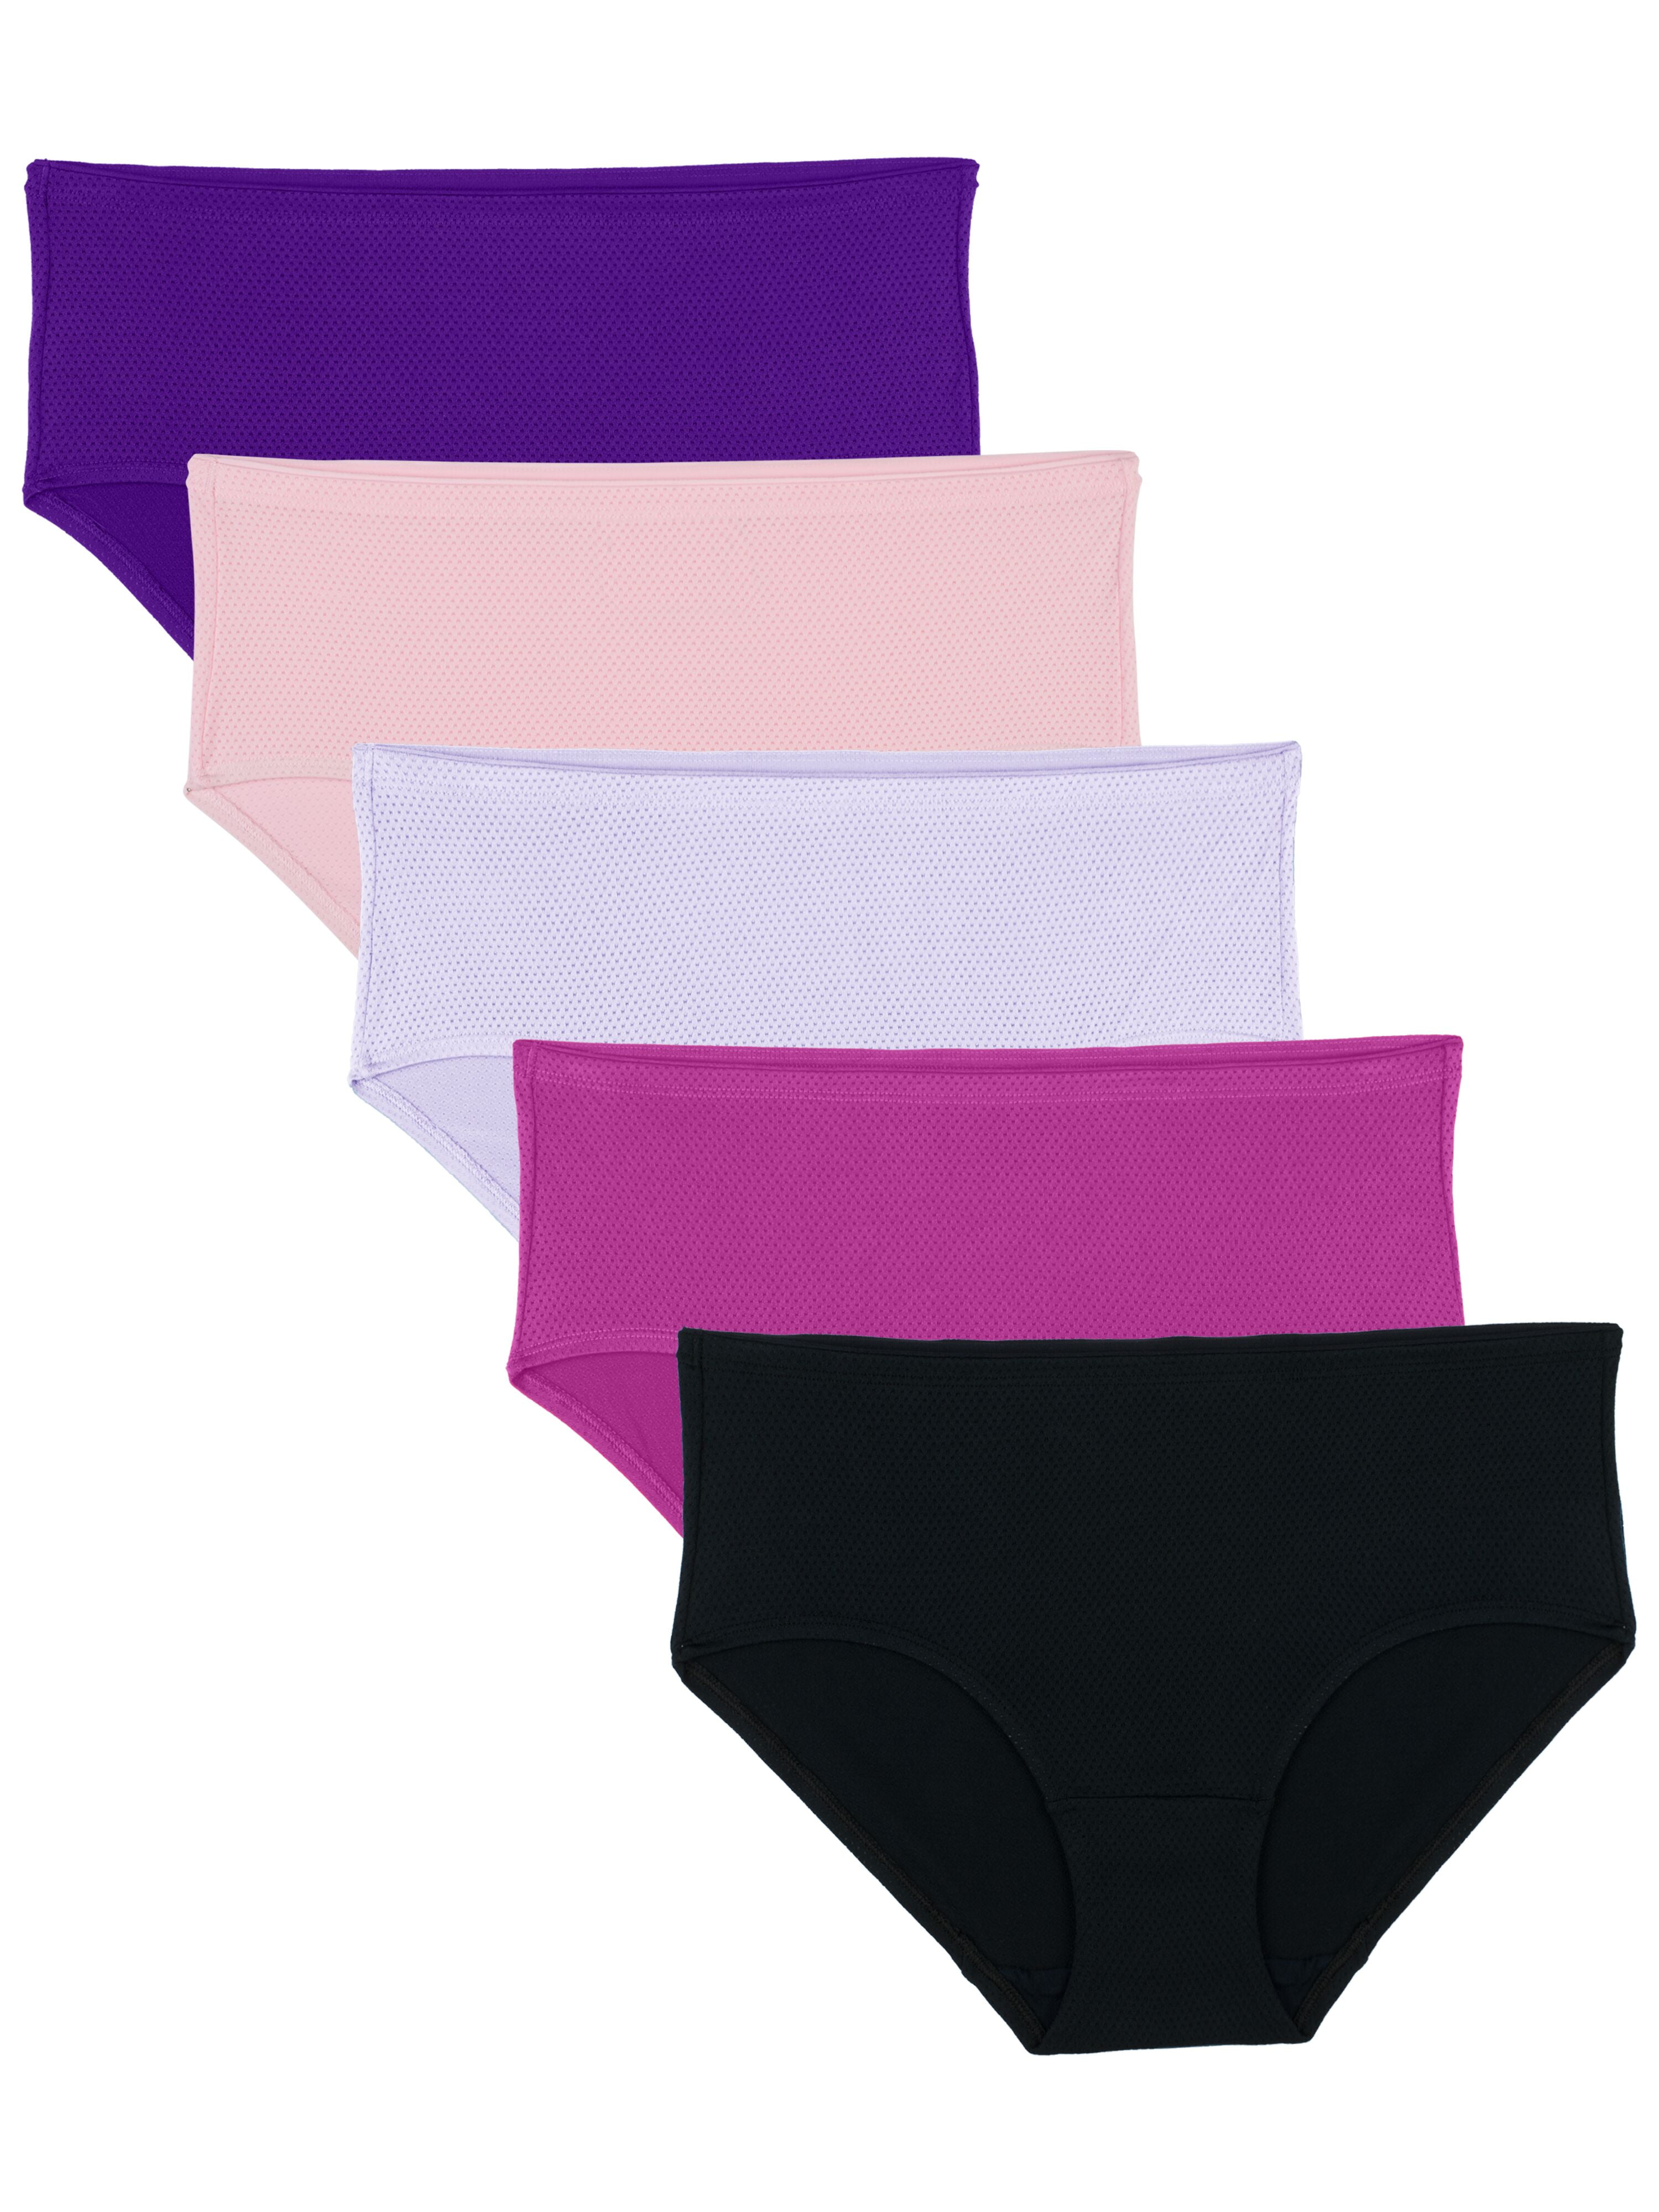 Fruit of the Loom Breathable 5 Pack High Cut Panty 5dpbbh1, Color